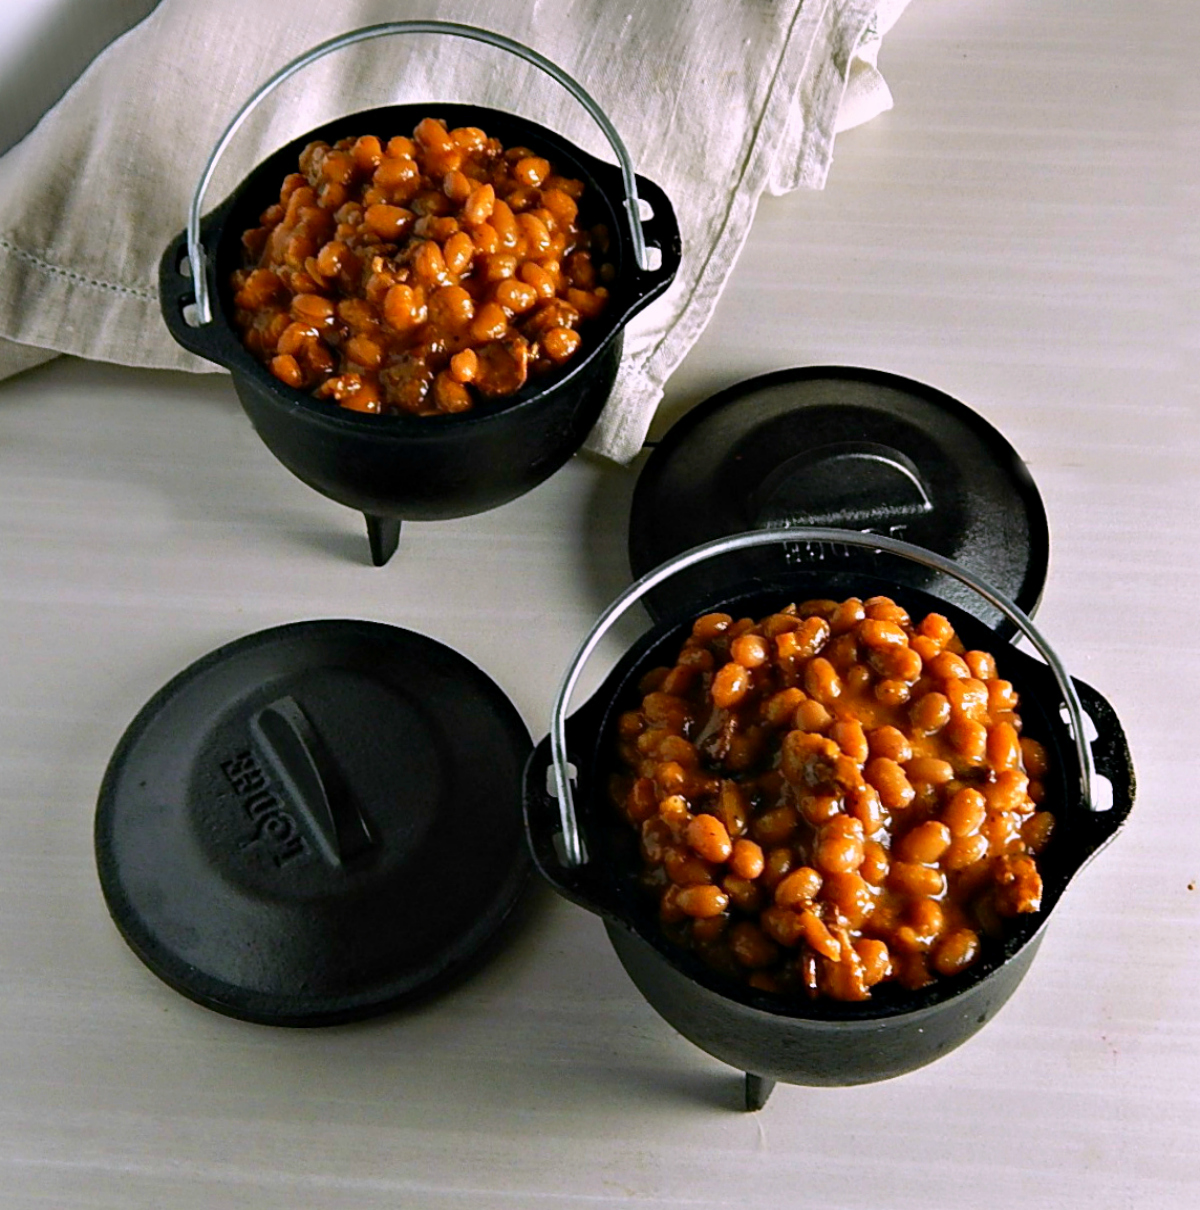 From the Bull & the Finch, Cheers Boston Baked Beans Instant Pot or Not